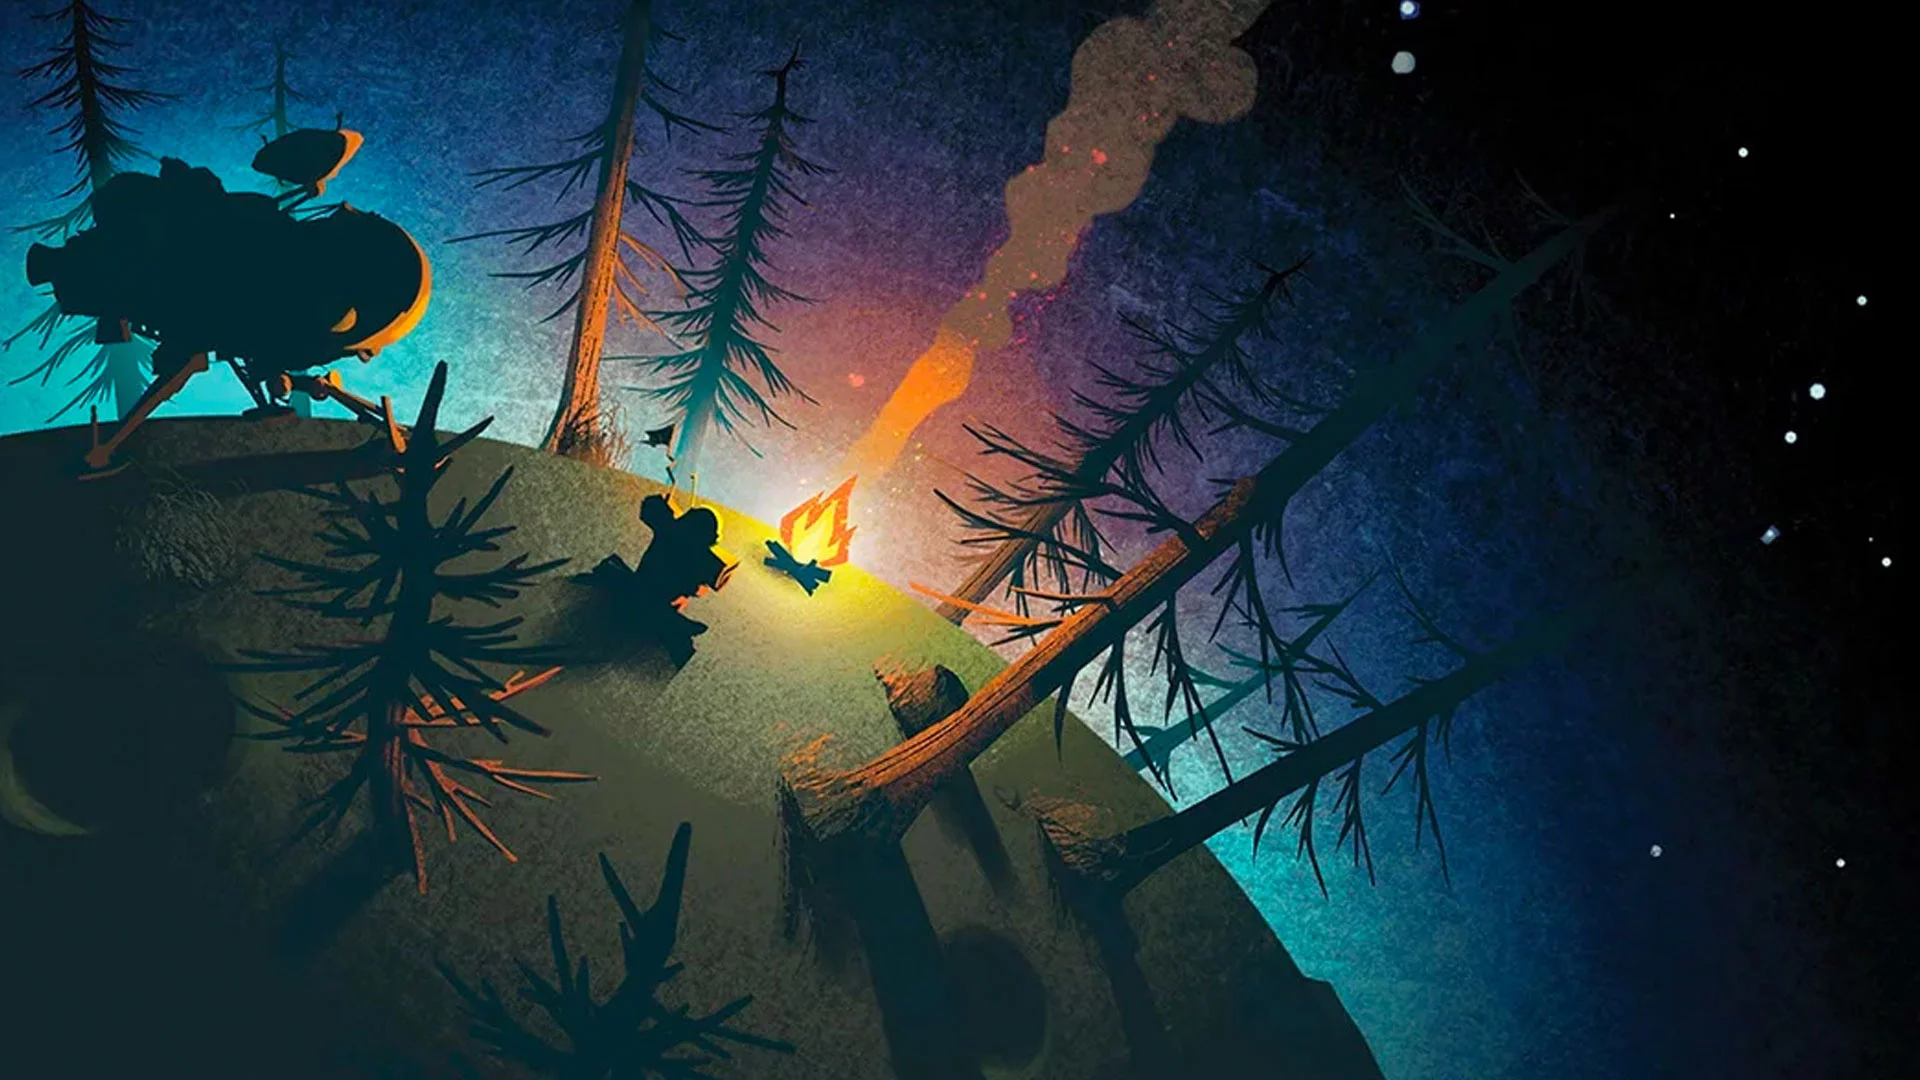 Outer Wilds arrives on Xbox Series X/S and PlayStation 5 this September